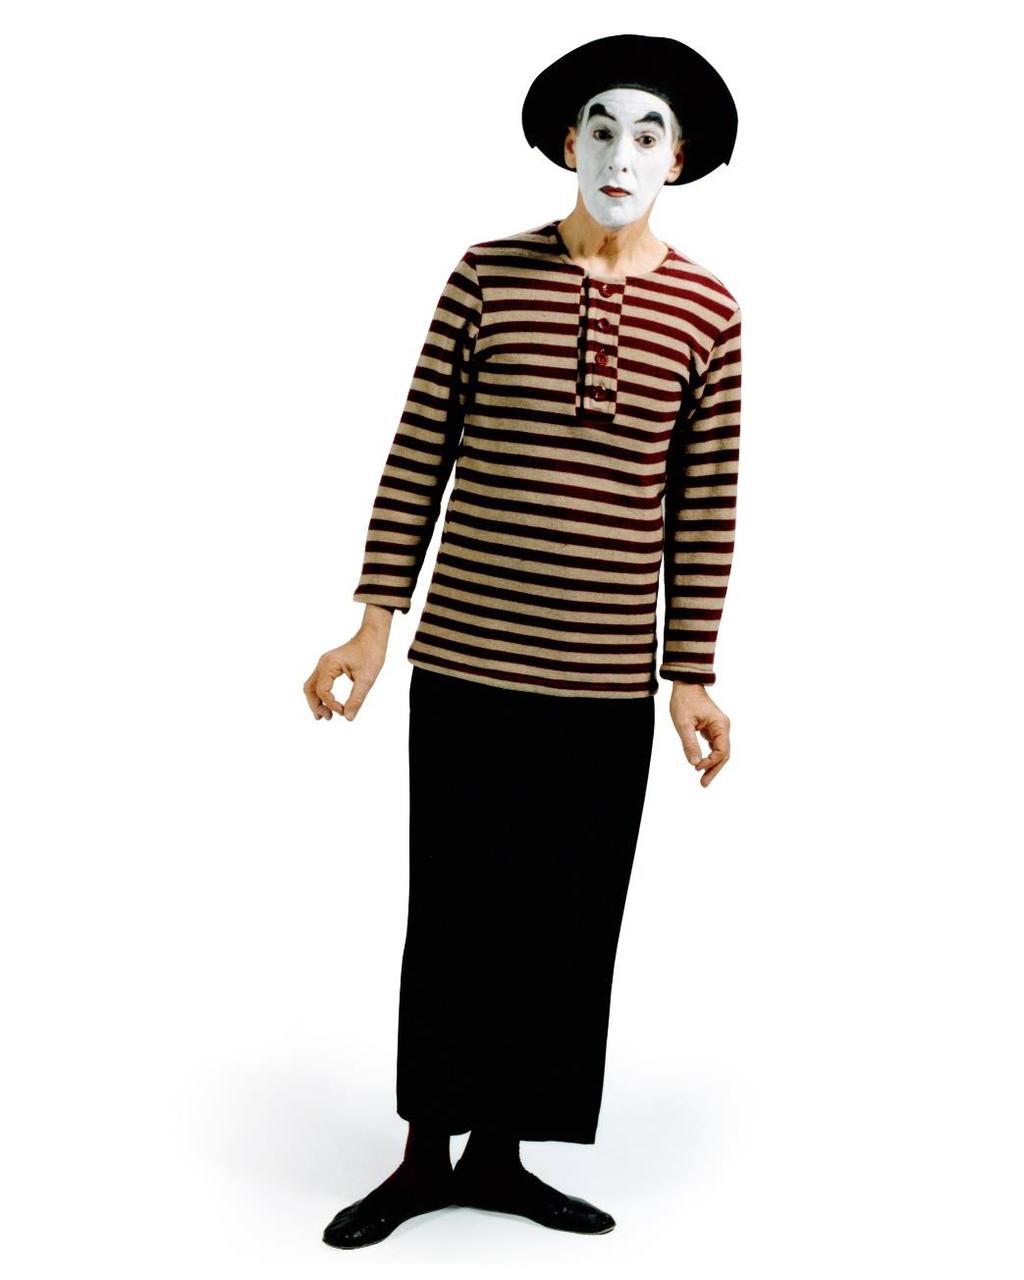 Lesson 1: The Challenge To develop an understanding of the rules of mime To develop